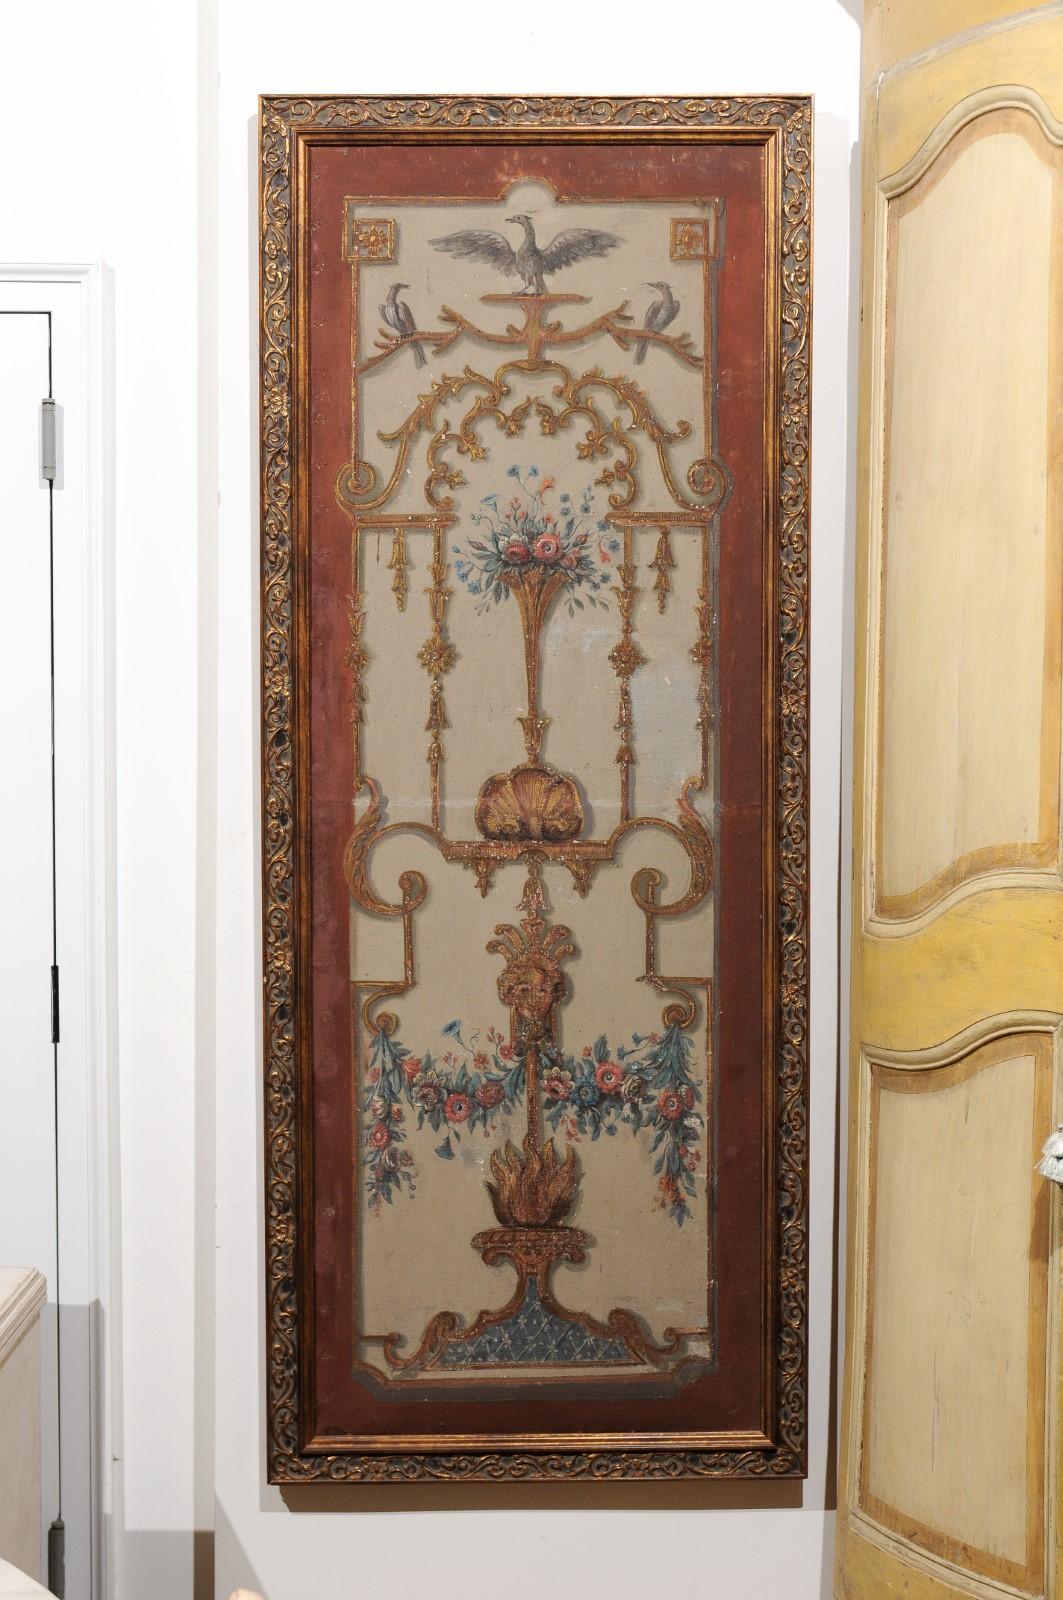 Canvas Pair of French Régence Period Early 18th Century Decorative Framed Wall Panels